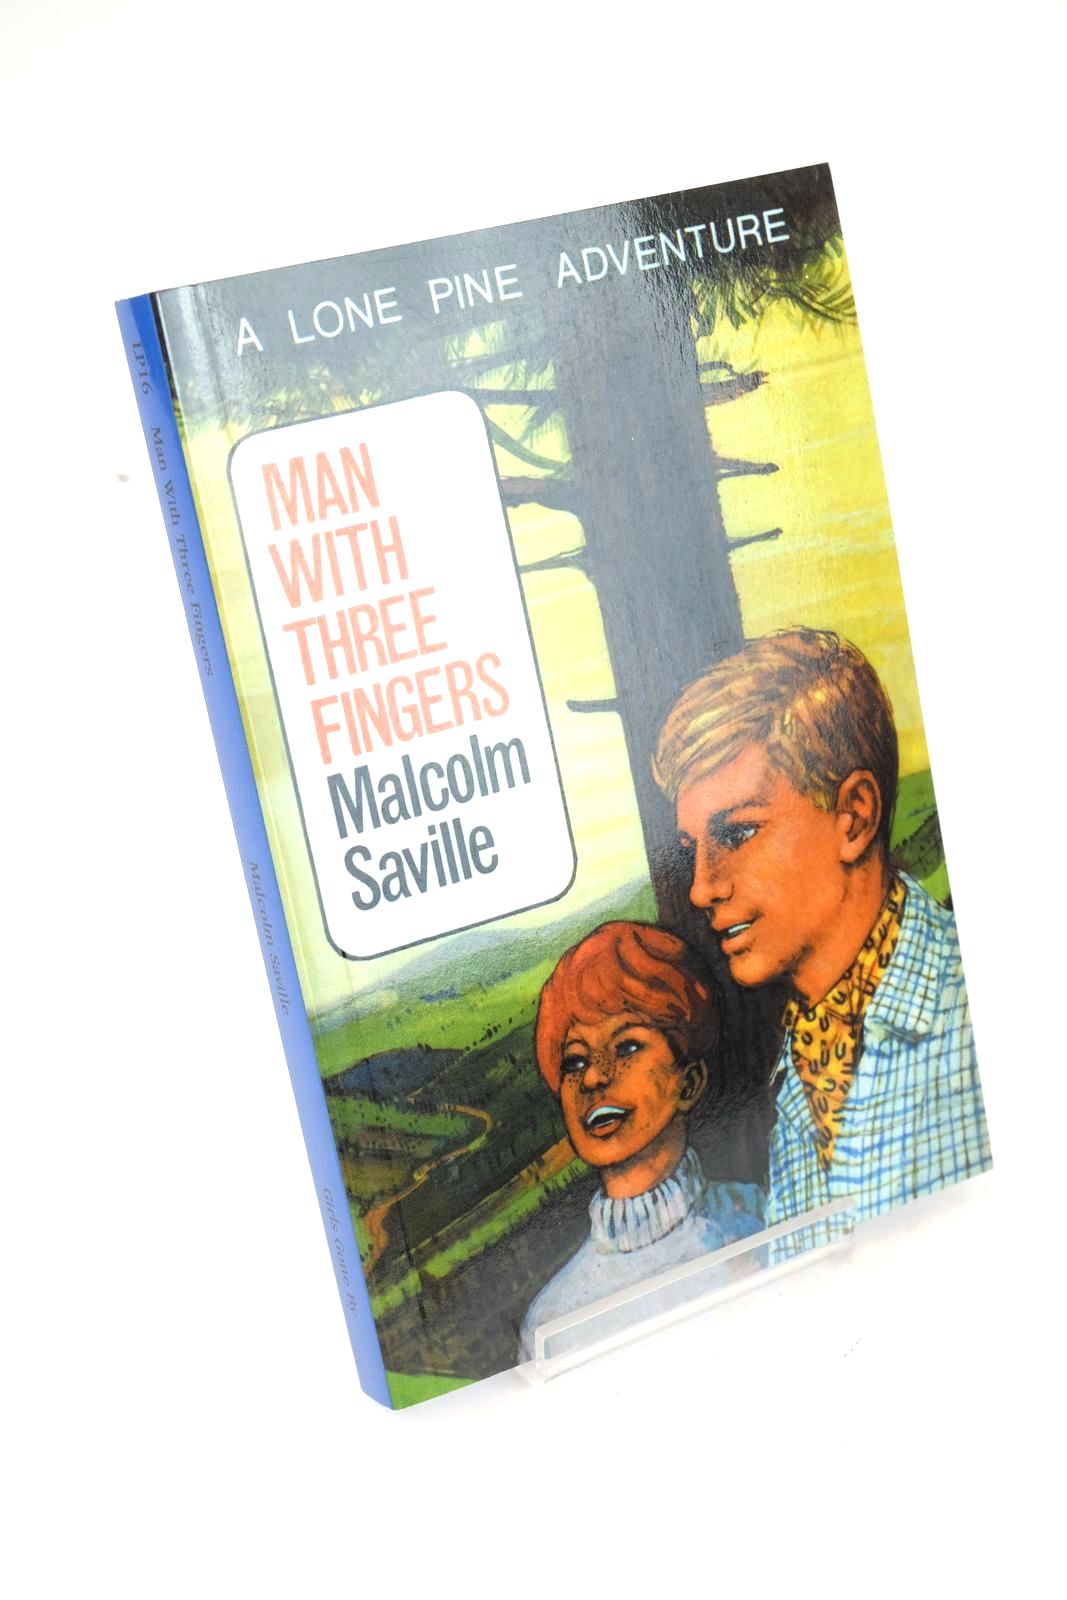 Photo of MAN WITH THREE FINGERS written by Saville, Malcolm illustrated by Whittlesea, Michael published by Girls Gone By (STOCK CODE: 1325442)  for sale by Stella & Rose's Books